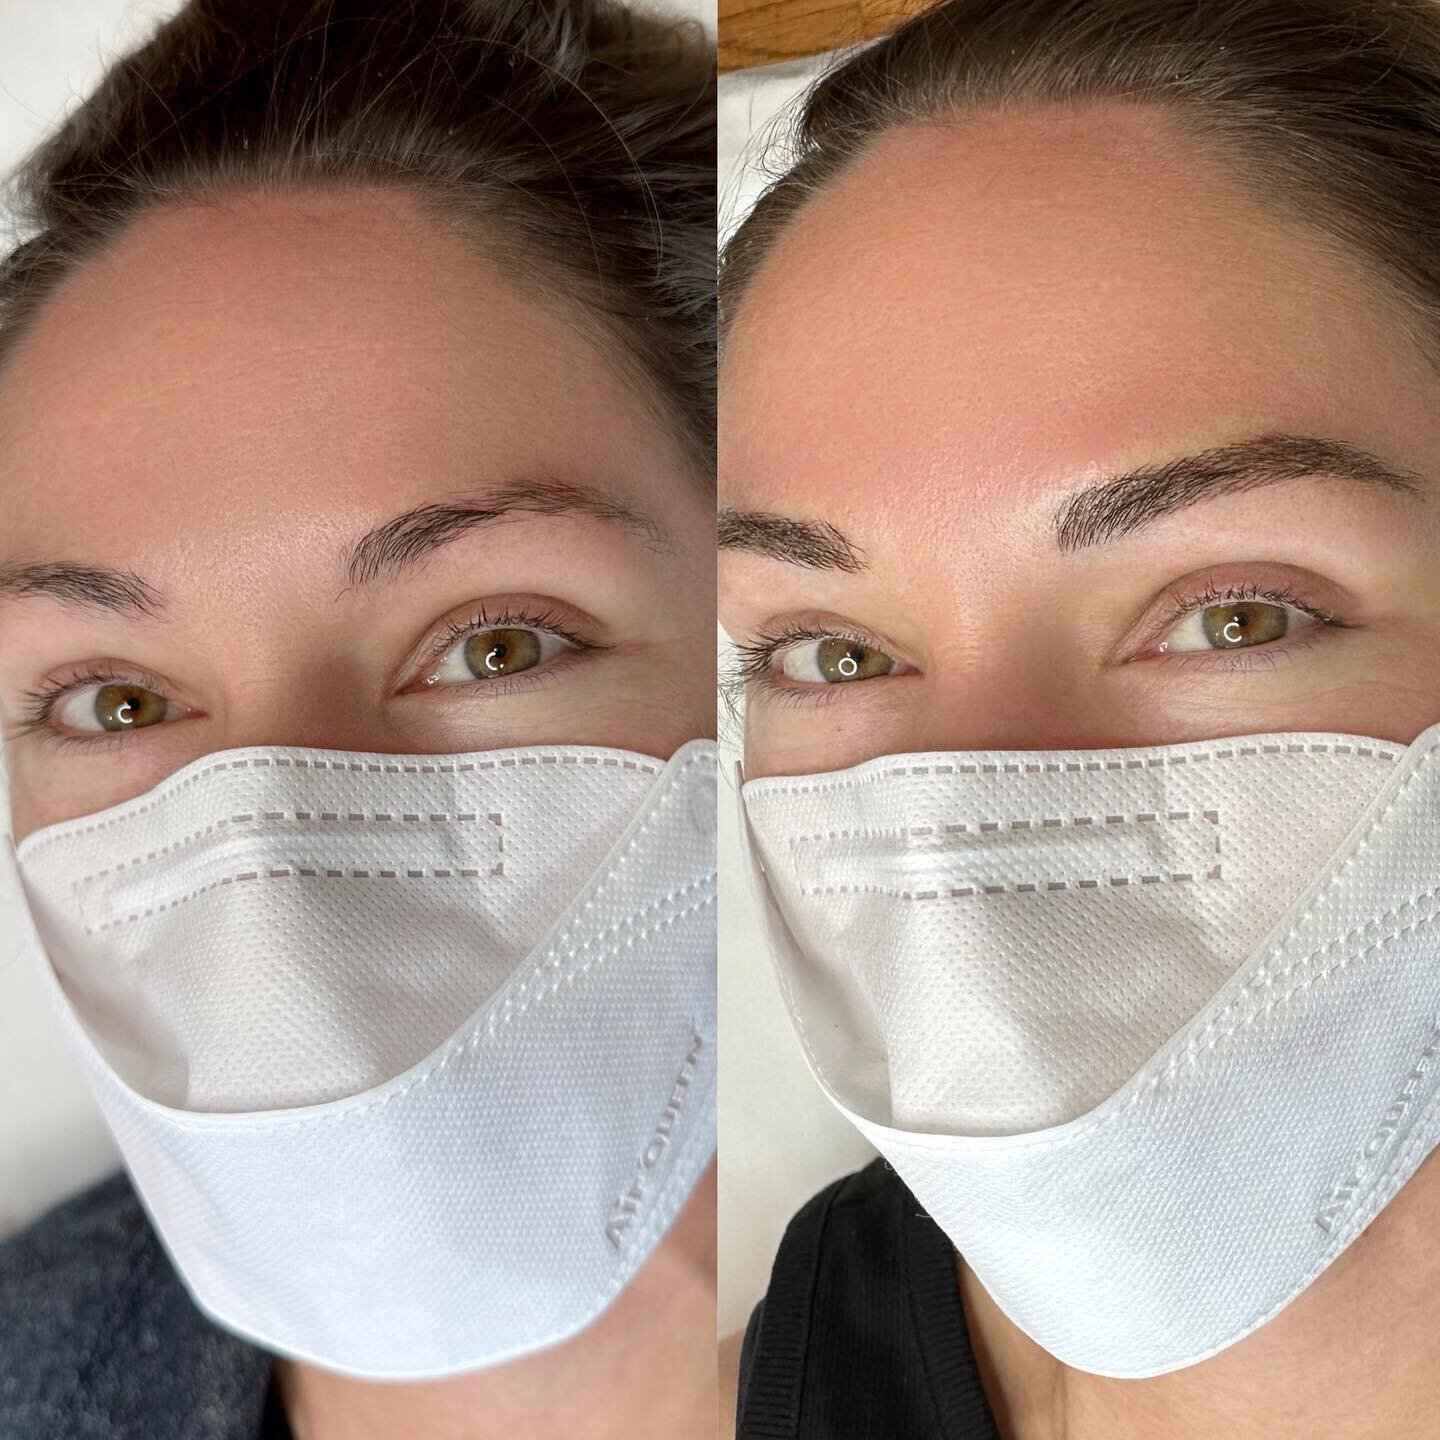 June calendar is open!
&mdash;
Skin type: Combination
Technique: Nano Feather Brows
Pain level: None
Appointment time: 2 hours
Sessions: 2 required
Healing time: 7-10 days (no scabbing)
Last: 2-3 years (depends on skin type)
&mdash;
For pricing &amp;